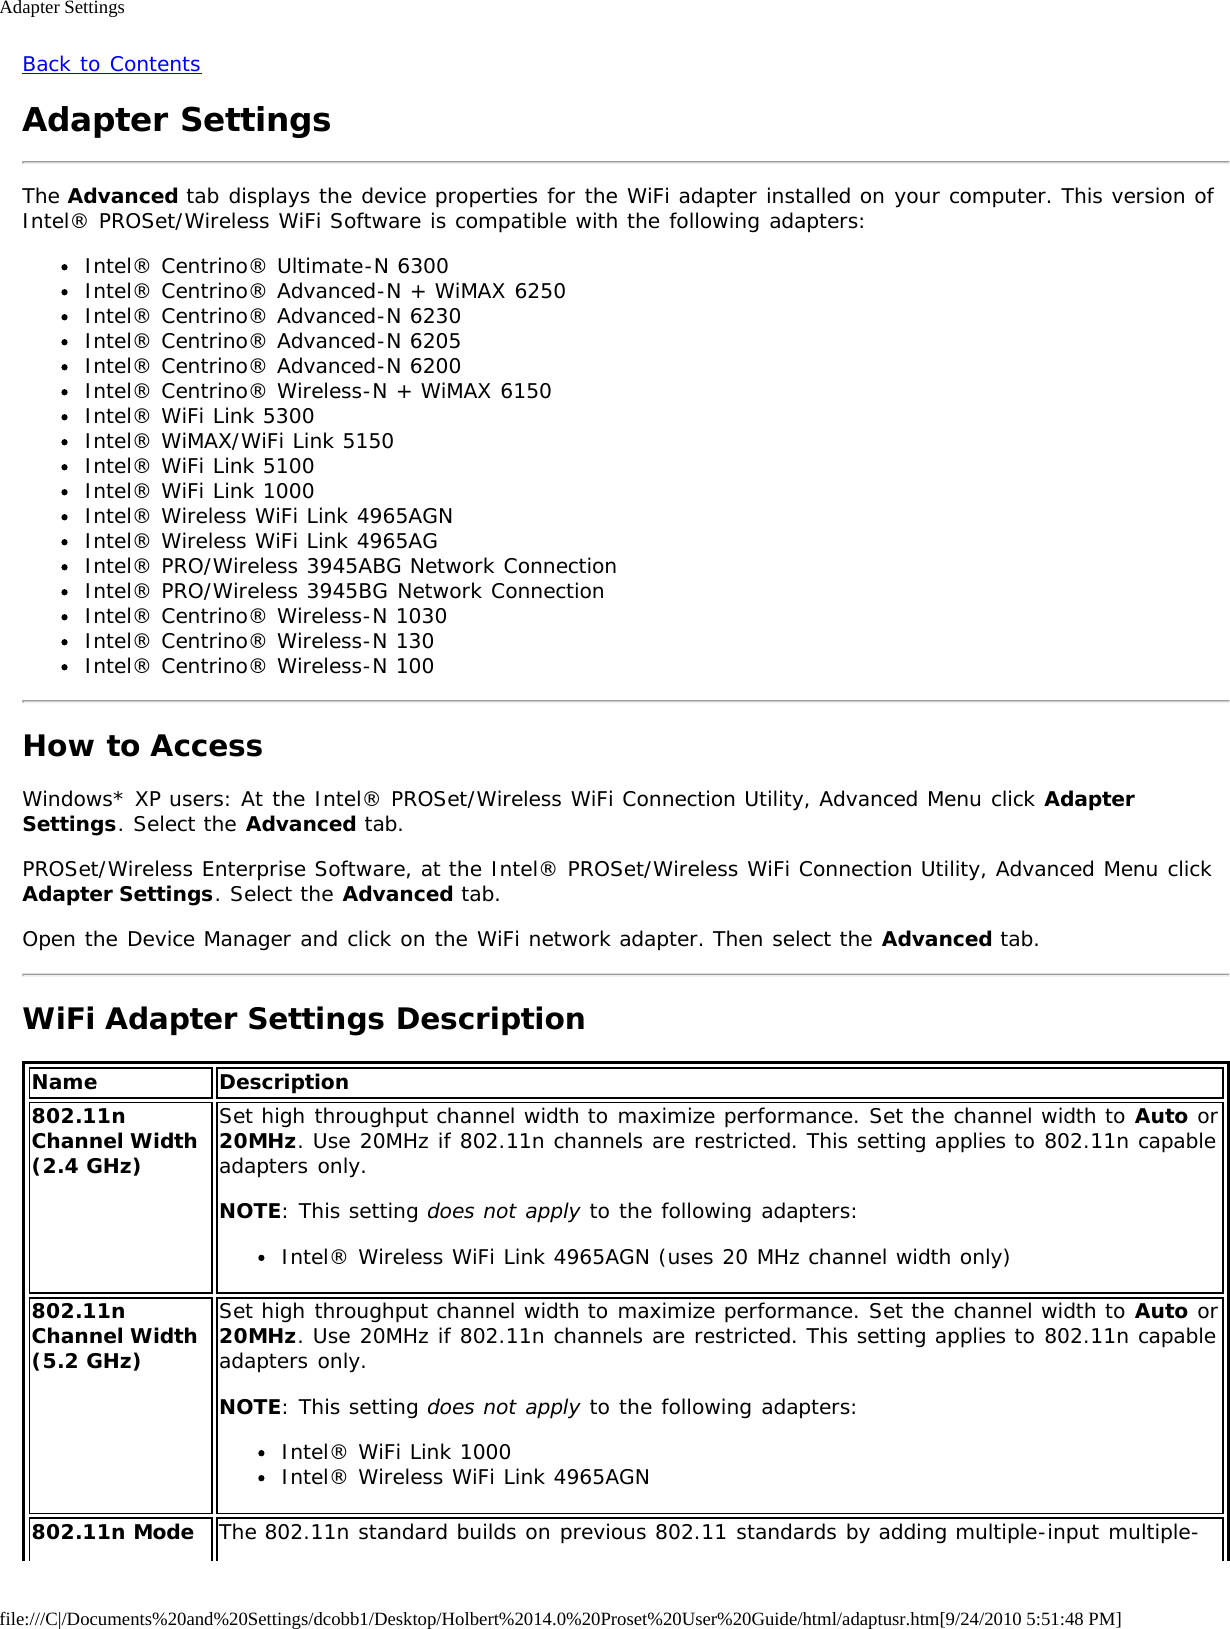 Adapter Settingsfile:///C|/Documents%20and%20Settings/dcobb1/Desktop/Holbert%2014.0%20Proset%20User%20Guide/html/adaptusr.htm[9/24/2010 5:51:48 PM]Back to ContentsAdapter SettingsThe Advanced tab displays the device properties for the WiFi adapter installed on your computer. This version ofIntel® PROSet/Wireless WiFi Software is compatible with the following adapters:Intel® Centrino® Ultimate-N 6300Intel® Centrino® Advanced-N + WiMAX 6250Intel® Centrino® Advanced-N 6230Intel® Centrino® Advanced-N 6205Intel® Centrino® Advanced-N 6200Intel® Centrino® Wireless-N + WiMAX 6150Intel® WiFi Link 5300Intel® WiMAX/WiFi Link 5150Intel® WiFi Link 5100Intel® WiFi Link 1000Intel® Wireless WiFi Link 4965AGNIntel® Wireless WiFi Link 4965AGIntel® PRO/Wireless 3945ABG Network ConnectionIntel® PRO/Wireless 3945BG Network ConnectionIntel® Centrino® Wireless-N 1030Intel® Centrino® Wireless-N 130Intel® Centrino® Wireless-N 100How to AccessWindows* XP users: At the Intel® PROSet/Wireless WiFi Connection Utility, Advanced Menu click AdapterSettings. Select the Advanced tab.PROSet/Wireless Enterprise Software, at the Intel® PROSet/Wireless WiFi Connection Utility, Advanced Menu clickAdapter Settings. Select the Advanced tab.Open the Device Manager and click on the WiFi network adapter. Then select the Advanced tab.WiFi Adapter Settings DescriptionName Description802.11nChannel Width(2.4 GHz)Set high throughput channel width to maximize performance. Set the channel width to Auto or20MHz. Use 20MHz if 802.11n channels are restricted. This setting applies to 802.11n capableadapters only.NOTE: This setting does not apply to the following adapters:Intel® Wireless WiFi Link 4965AGN (uses 20 MHz channel width only)802.11nChannel Width(5.2 GHz)Set high throughput channel width to maximize performance. Set the channel width to Auto or20MHz. Use 20MHz if 802.11n channels are restricted. This setting applies to 802.11n capableadapters only.NOTE: This setting does not apply to the following adapters:Intel® WiFi Link 1000Intel® Wireless WiFi Link 4965AGN802.11n Mode The 802.11n standard builds on previous 802.11 standards by adding multiple-input multiple-